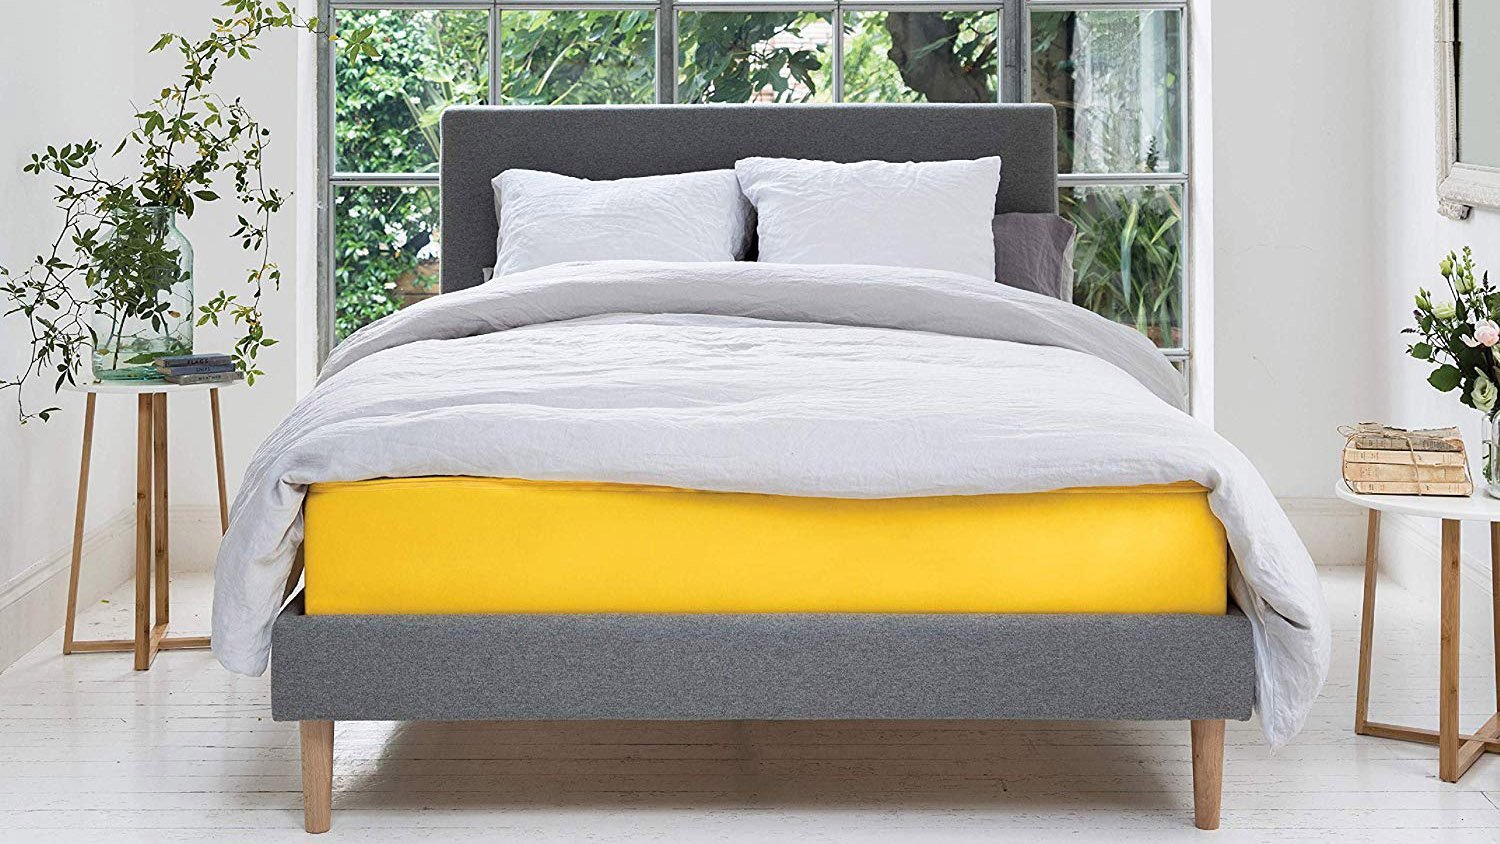 Best beds 2021: Our pick of the best single, double and ...